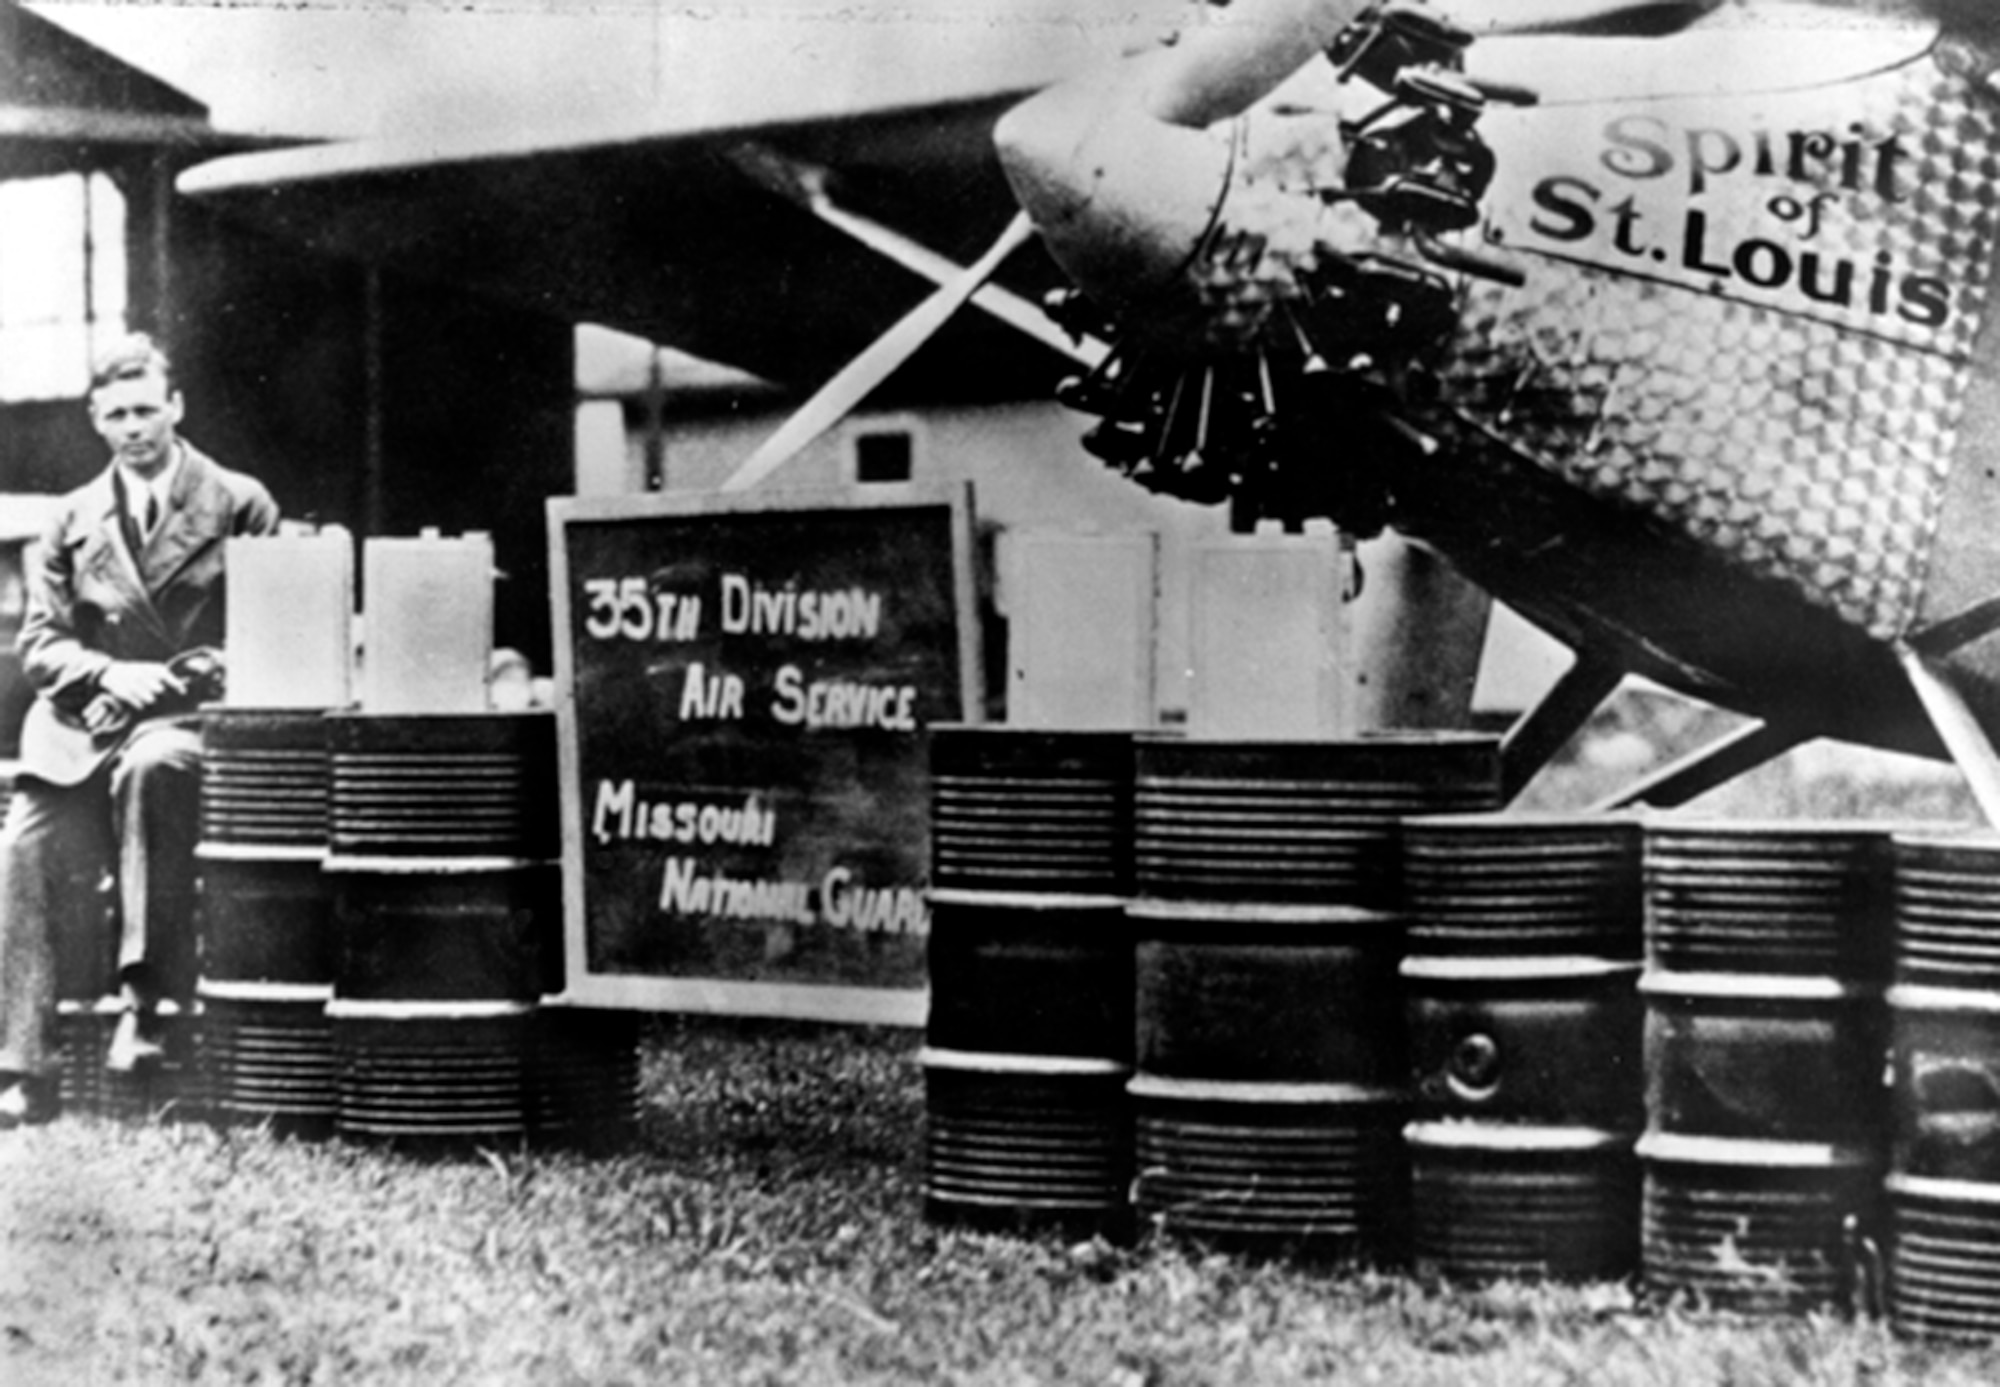 Aviator Capt. Charles Lindbergh, 110th Observation Squadron, 35th Division, Missouri National Guard (now 131st Bomb Wing, Missouri Air National Guard) poses beside the "Spirit of Saint Louis" at Robertson Field with a representation of how much fuel was required to complete his historic 33 1/2 solo flight from New York to Paris in the "Spirit of Saint Louis" on May 21, 1927.  He had to seek permission from his commanders at the 110th to make this flight.  (131st Bomb Wing file photo/RELEASED)